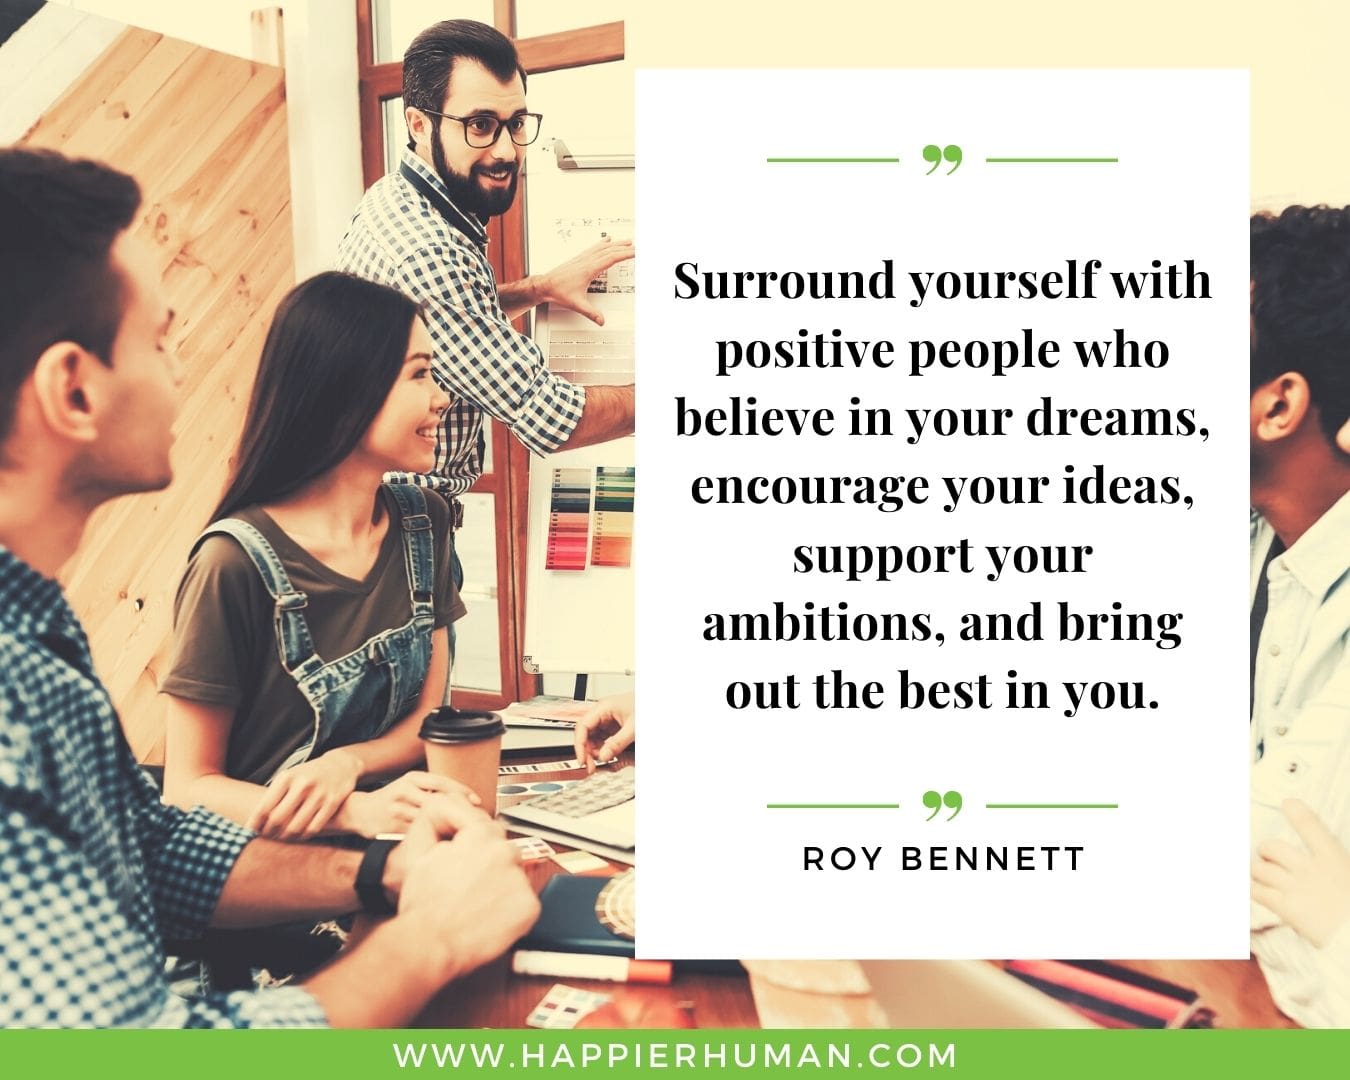 Toxic People Quotes - “Surround yourself with positive people who believe in your dreams, encourage your ideas, support your ambitions, and bring out the best in you.” – Roy Bennett